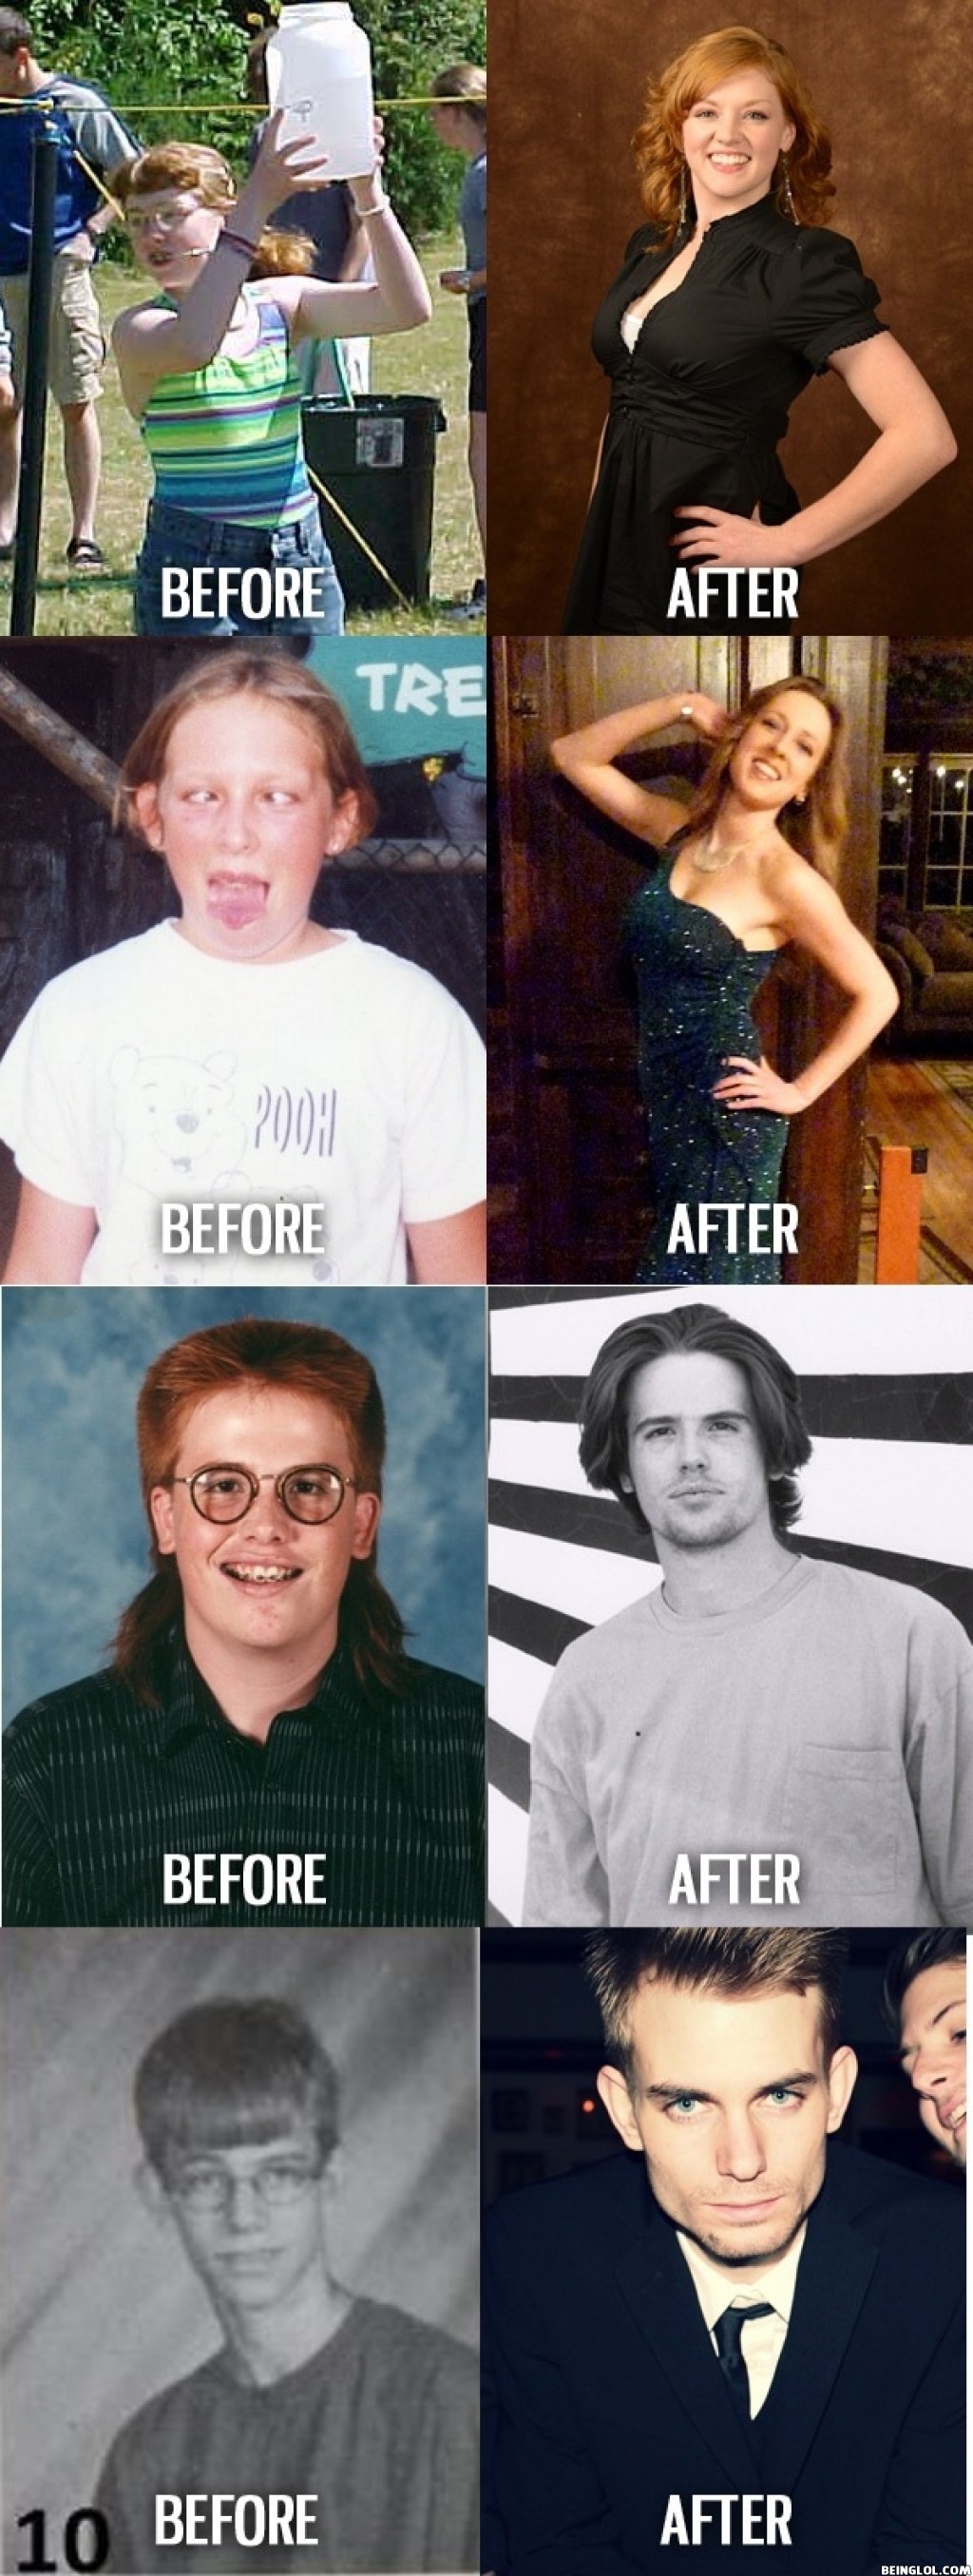 Before and After Puberty Wins!